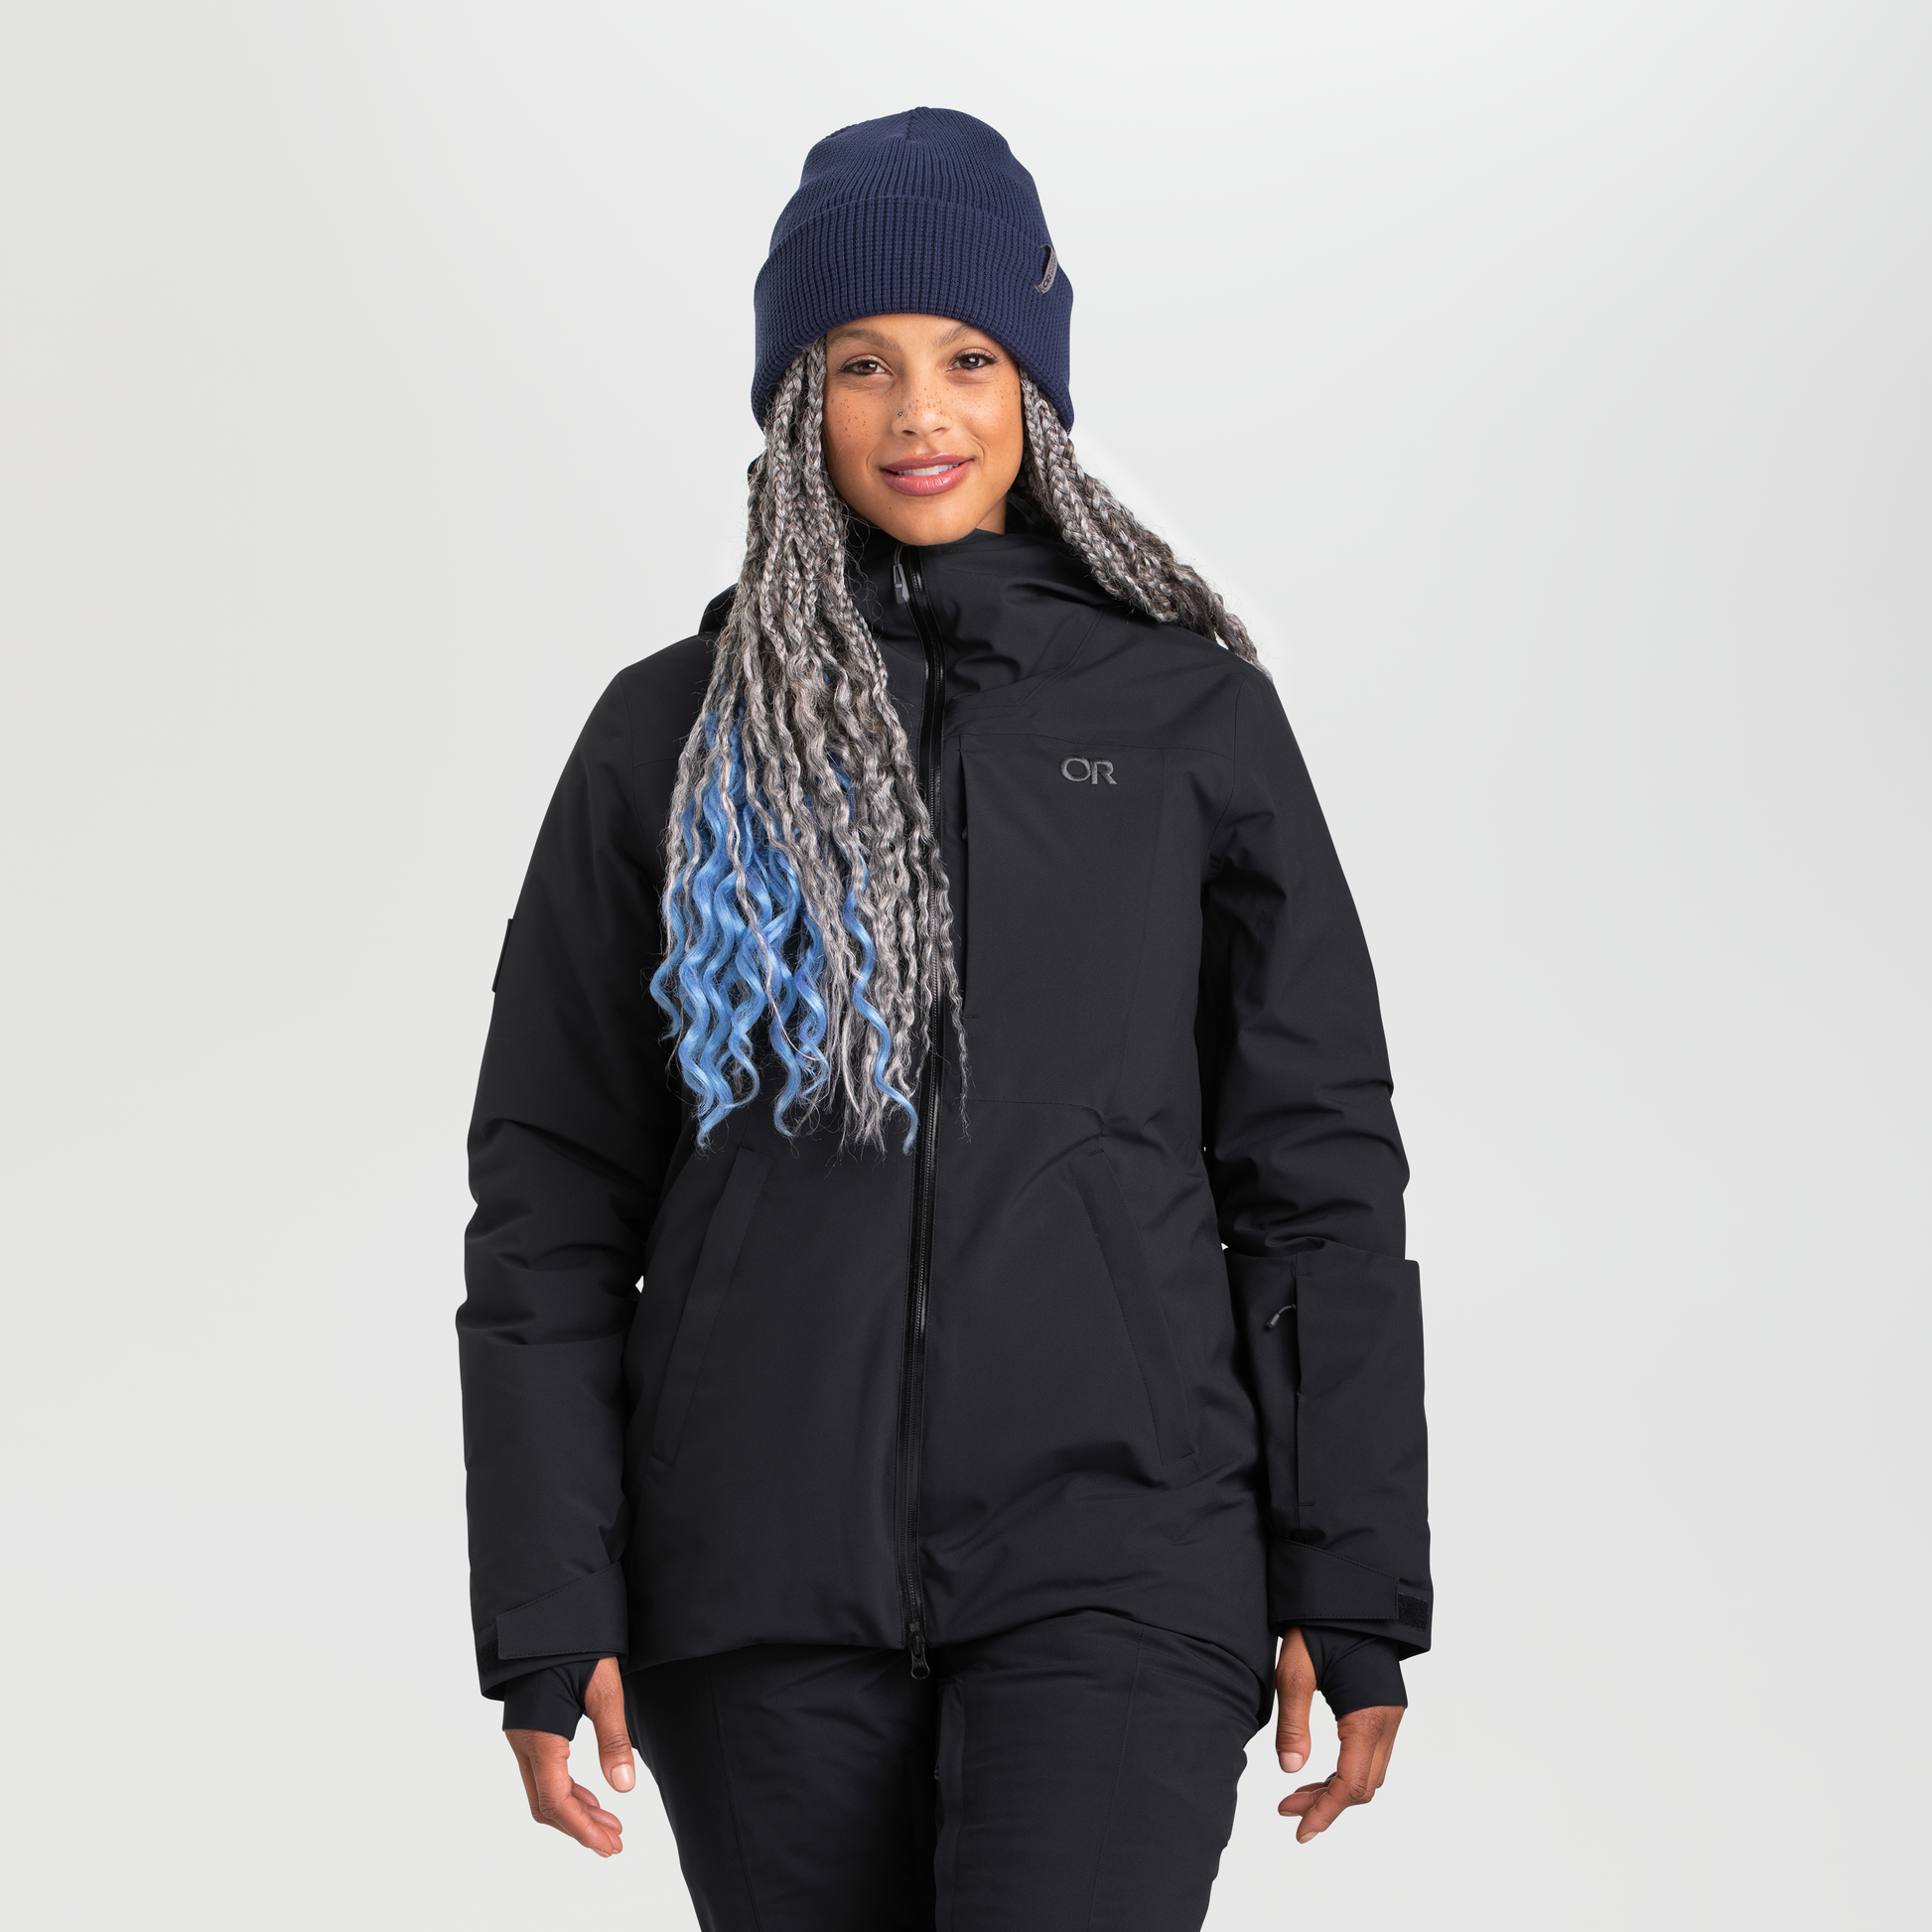 Women's Lightweight Padded Jacket from Crew Clothing Company